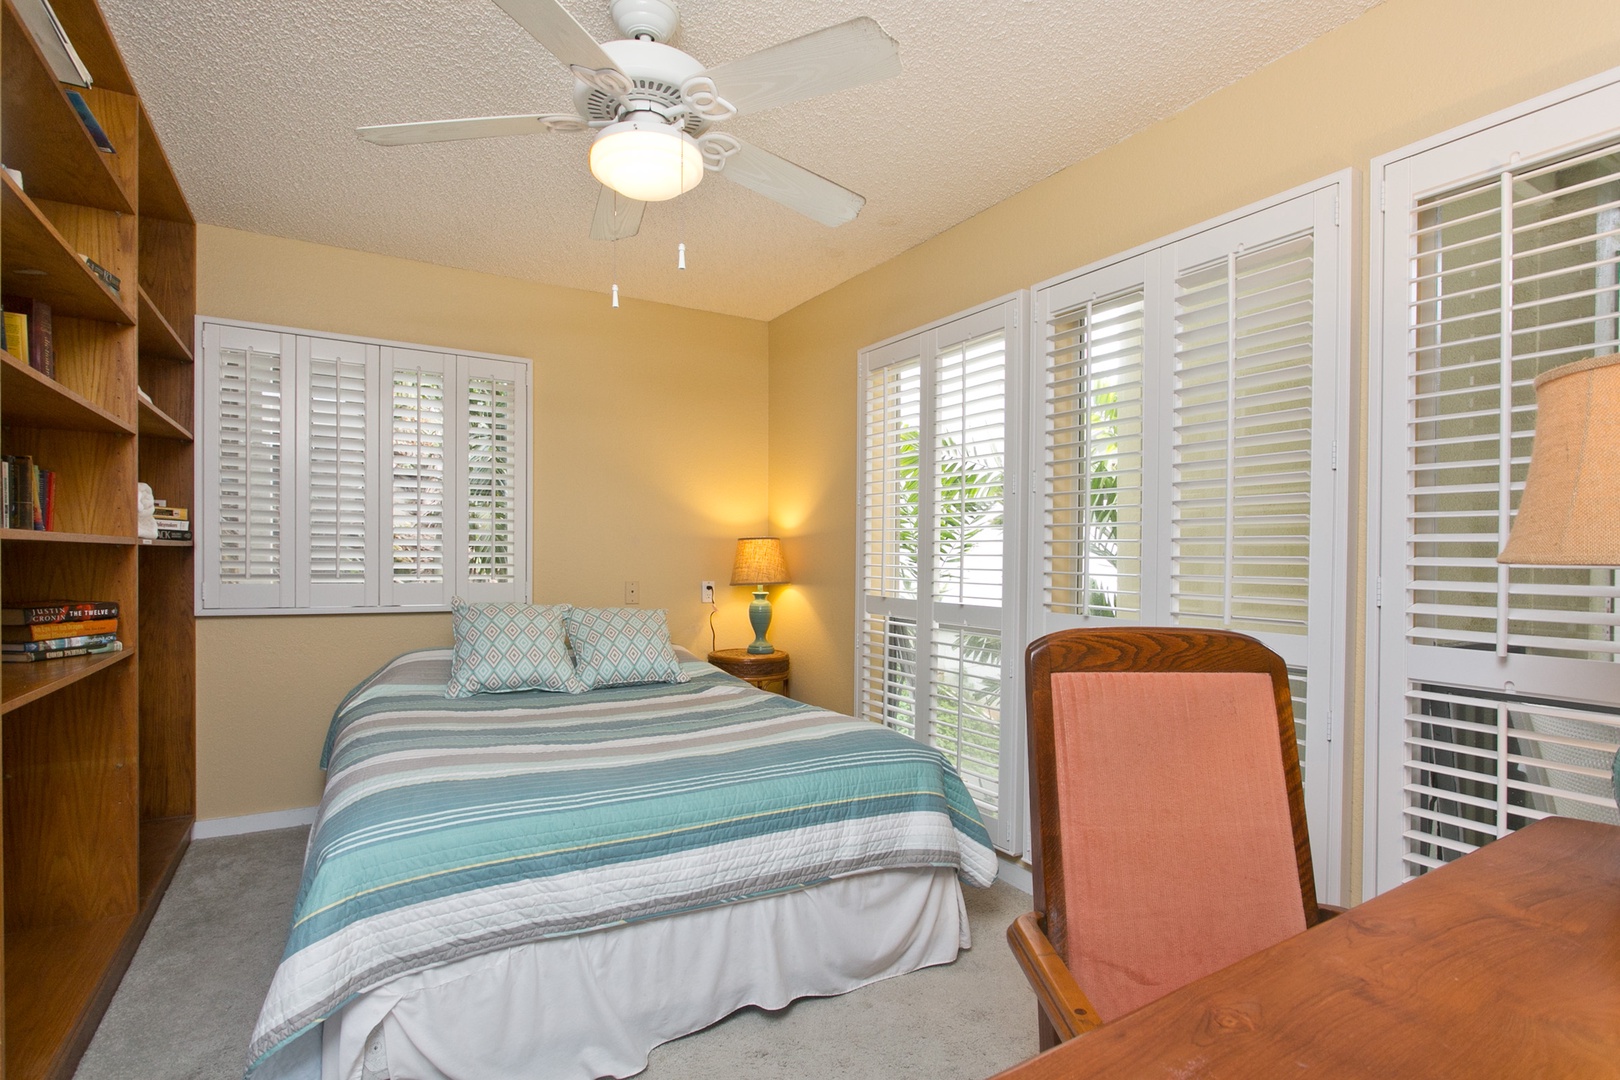 Kailua Vacation Rentals, Hale Kolea* - Guest bedroom 4 with a queen bed, desk area and natural lighting.